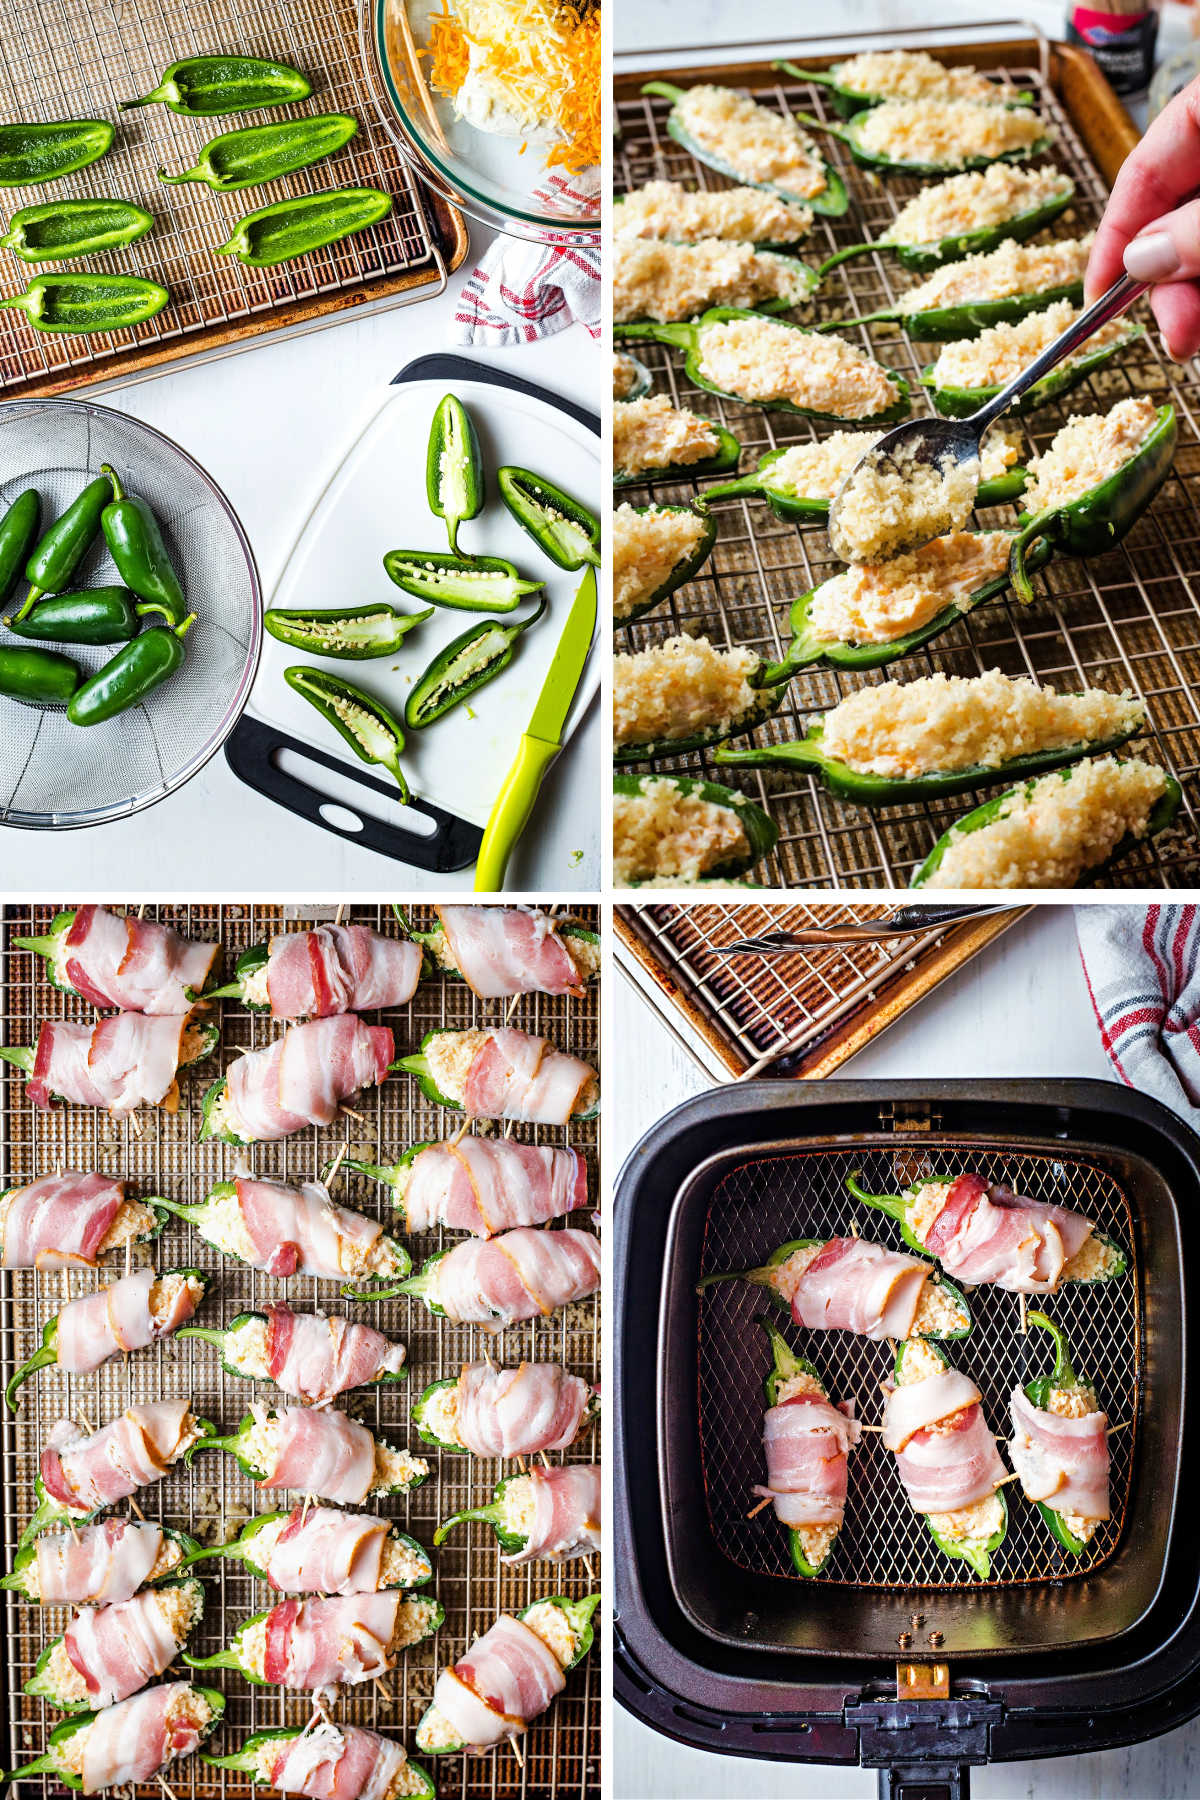 process steps for making air fryer jalapeno poppers: remove seeds from peppers; fill with cheese and top with breadcrumbs; wrap in bacon; cook in air fryer.